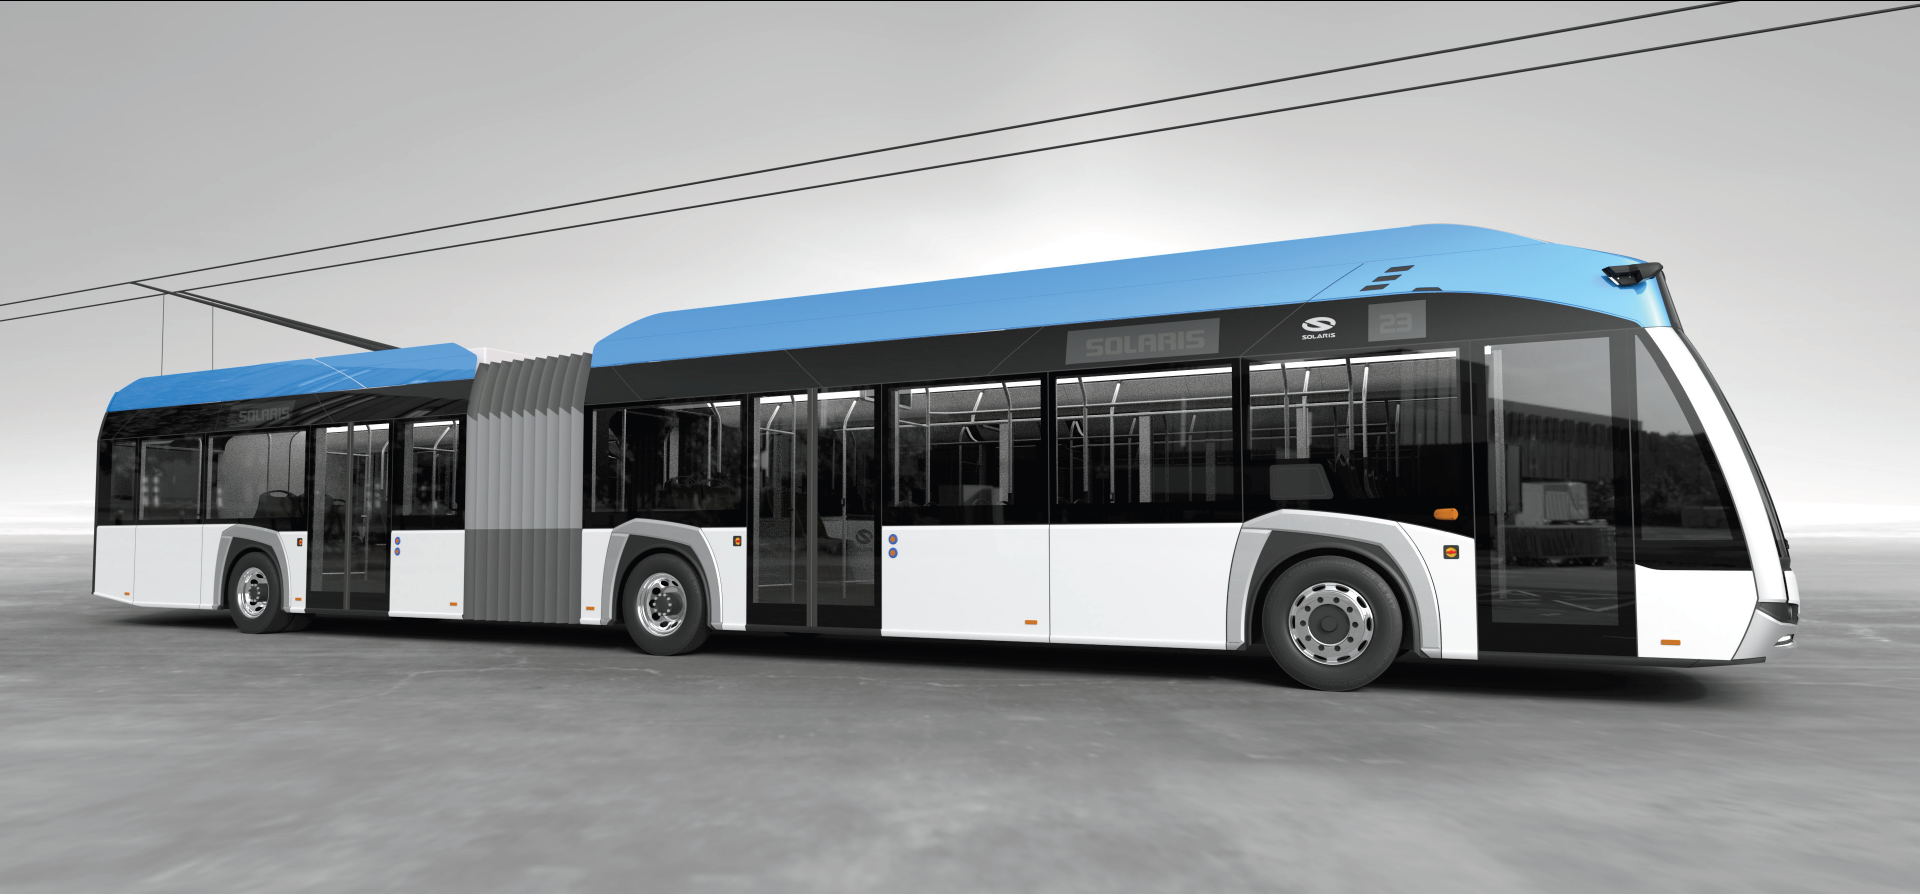 10 Solaris MetroStyle trolleybuses will be delivered for the first time in the Netherlands